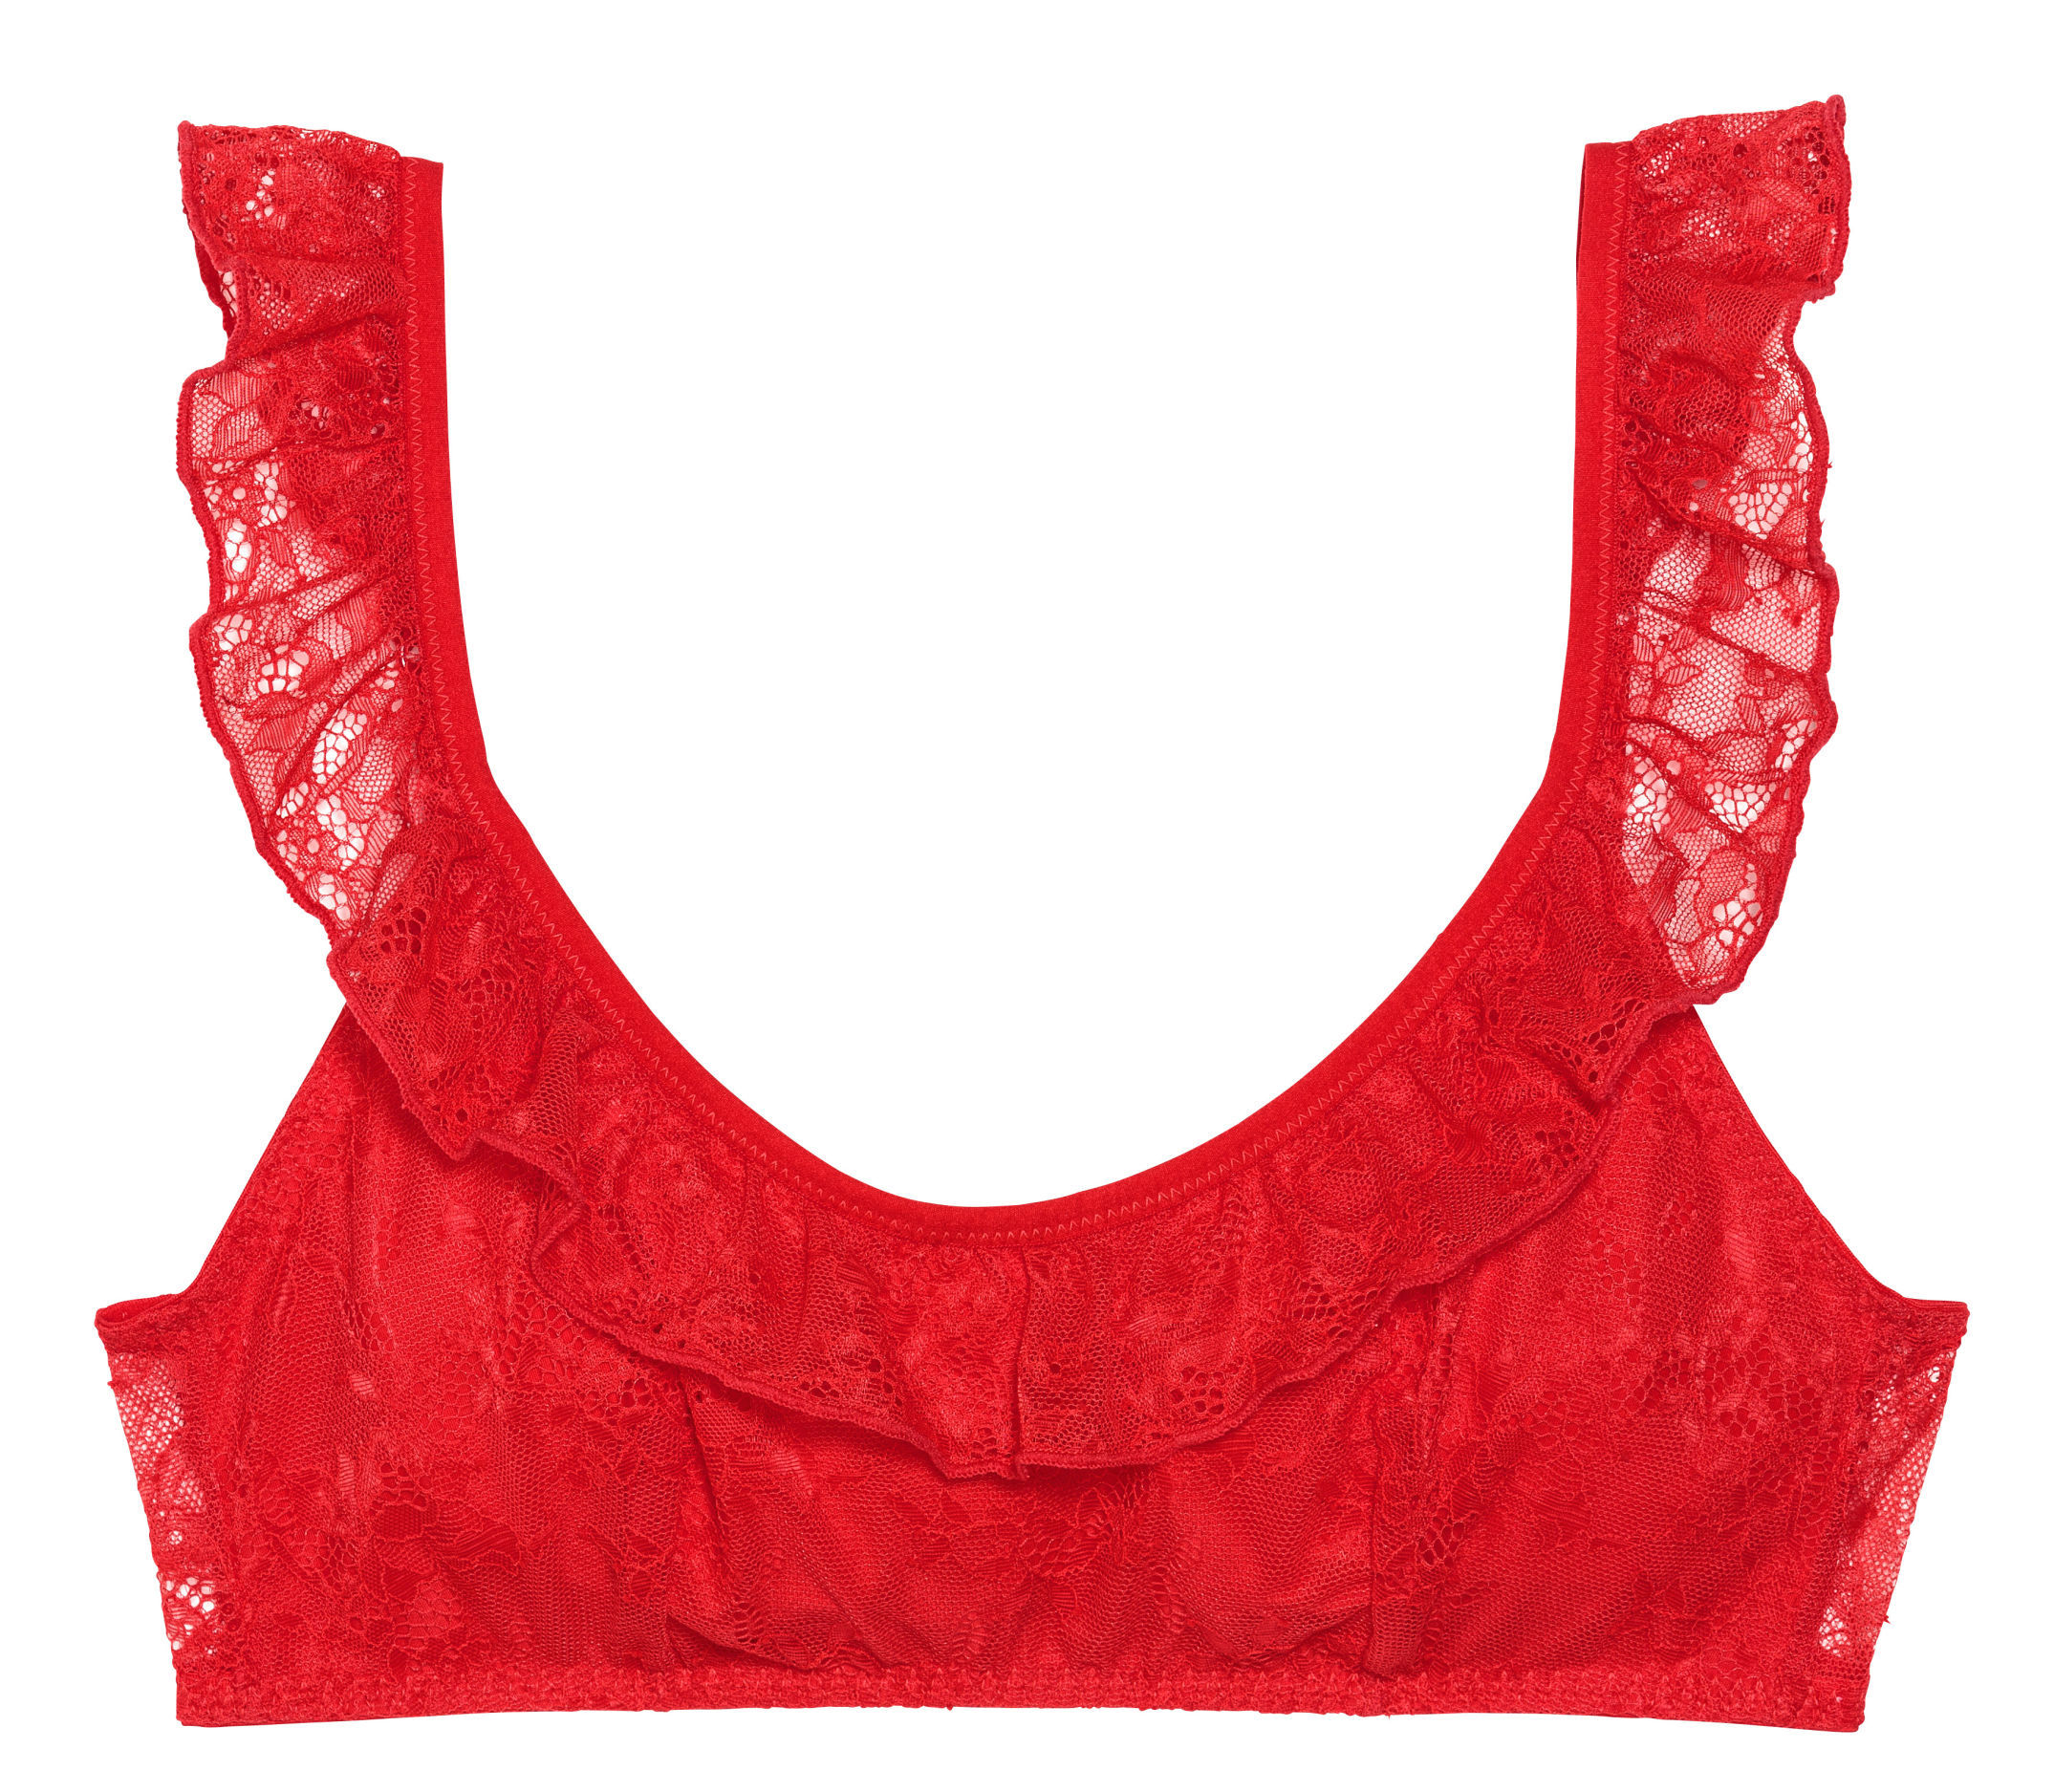 14 Cute Bras for Girls with Fuller Busts | Preview.ph